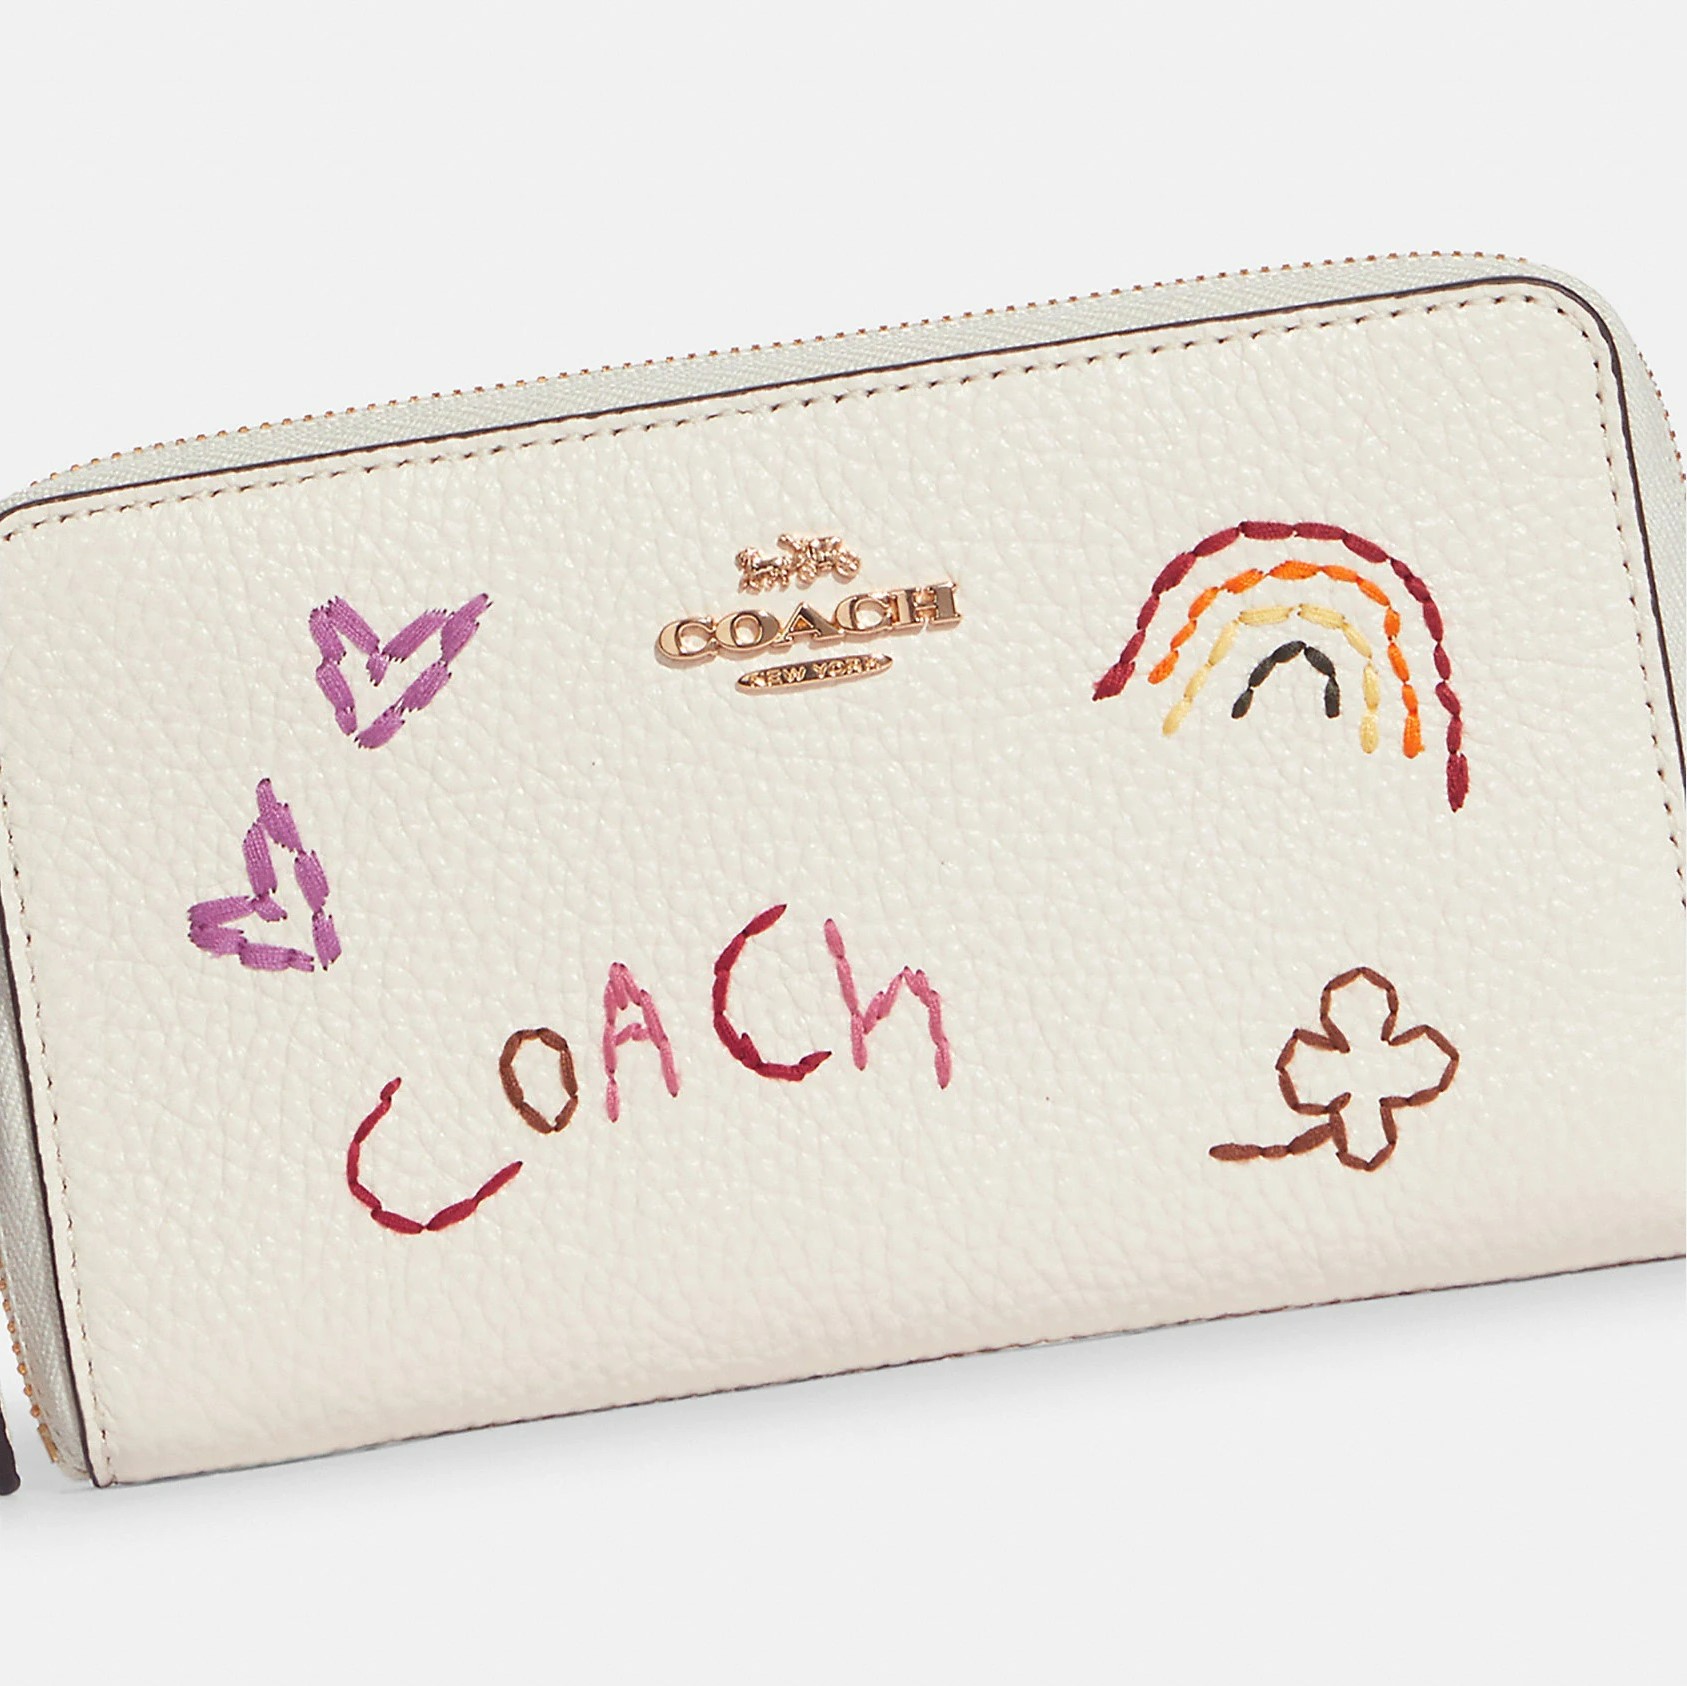 VÍ DÀI WHITE COACH MEDIUM ID ZIP WALLET WITH DIARY EMBROIDERY 2